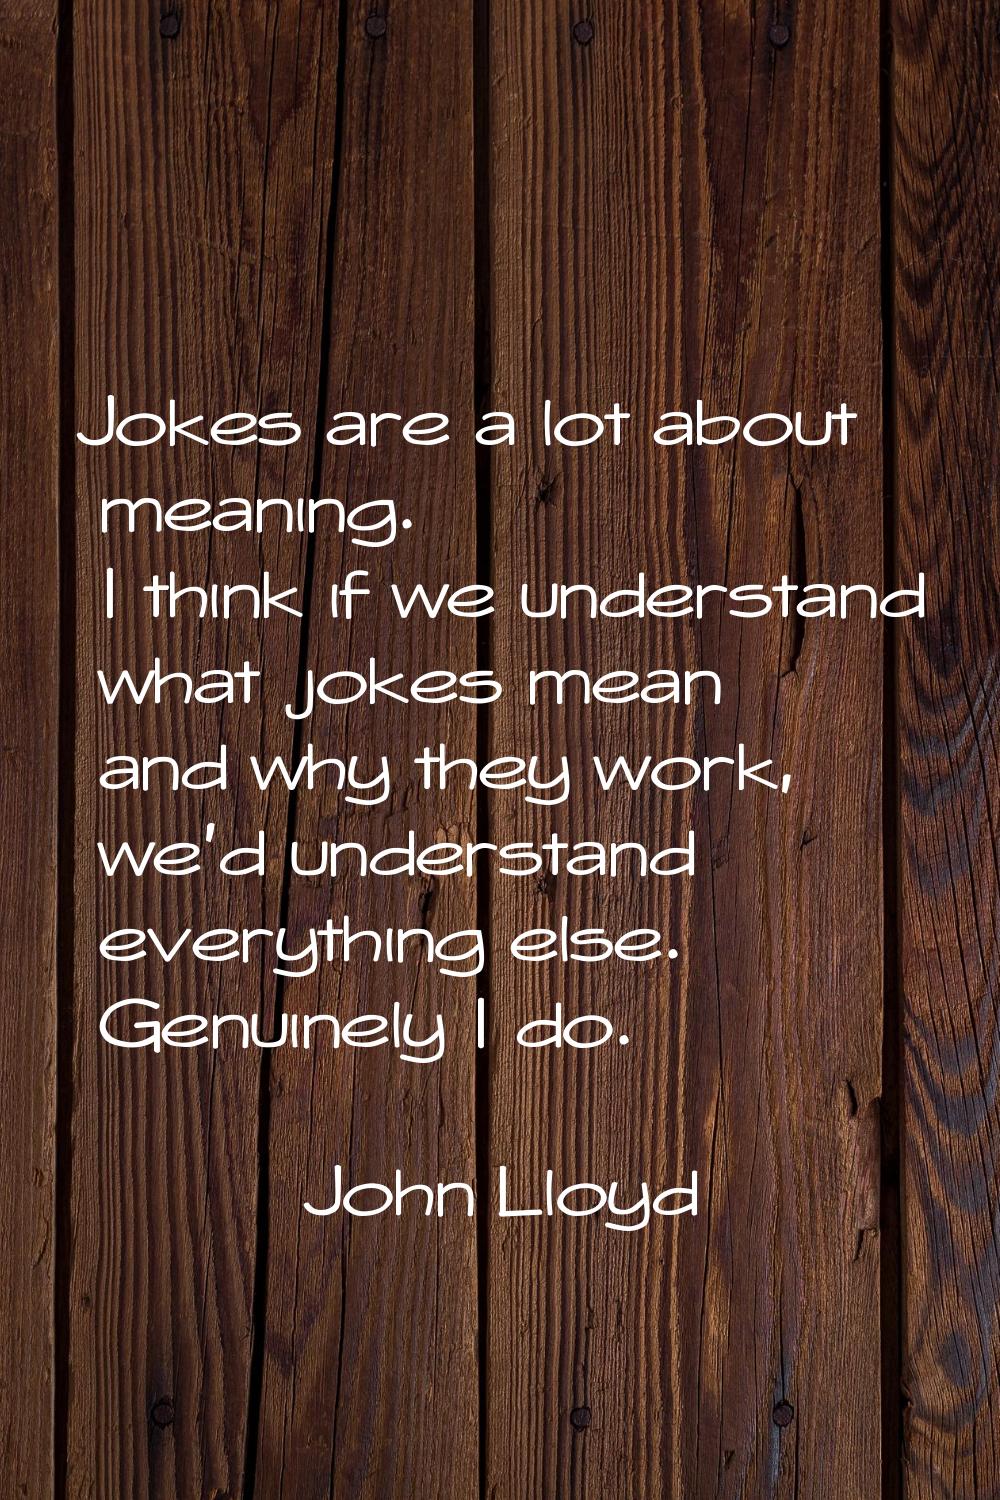 Jokes are a lot about meaning. I think if we understand what jokes mean and why they work, we'd und